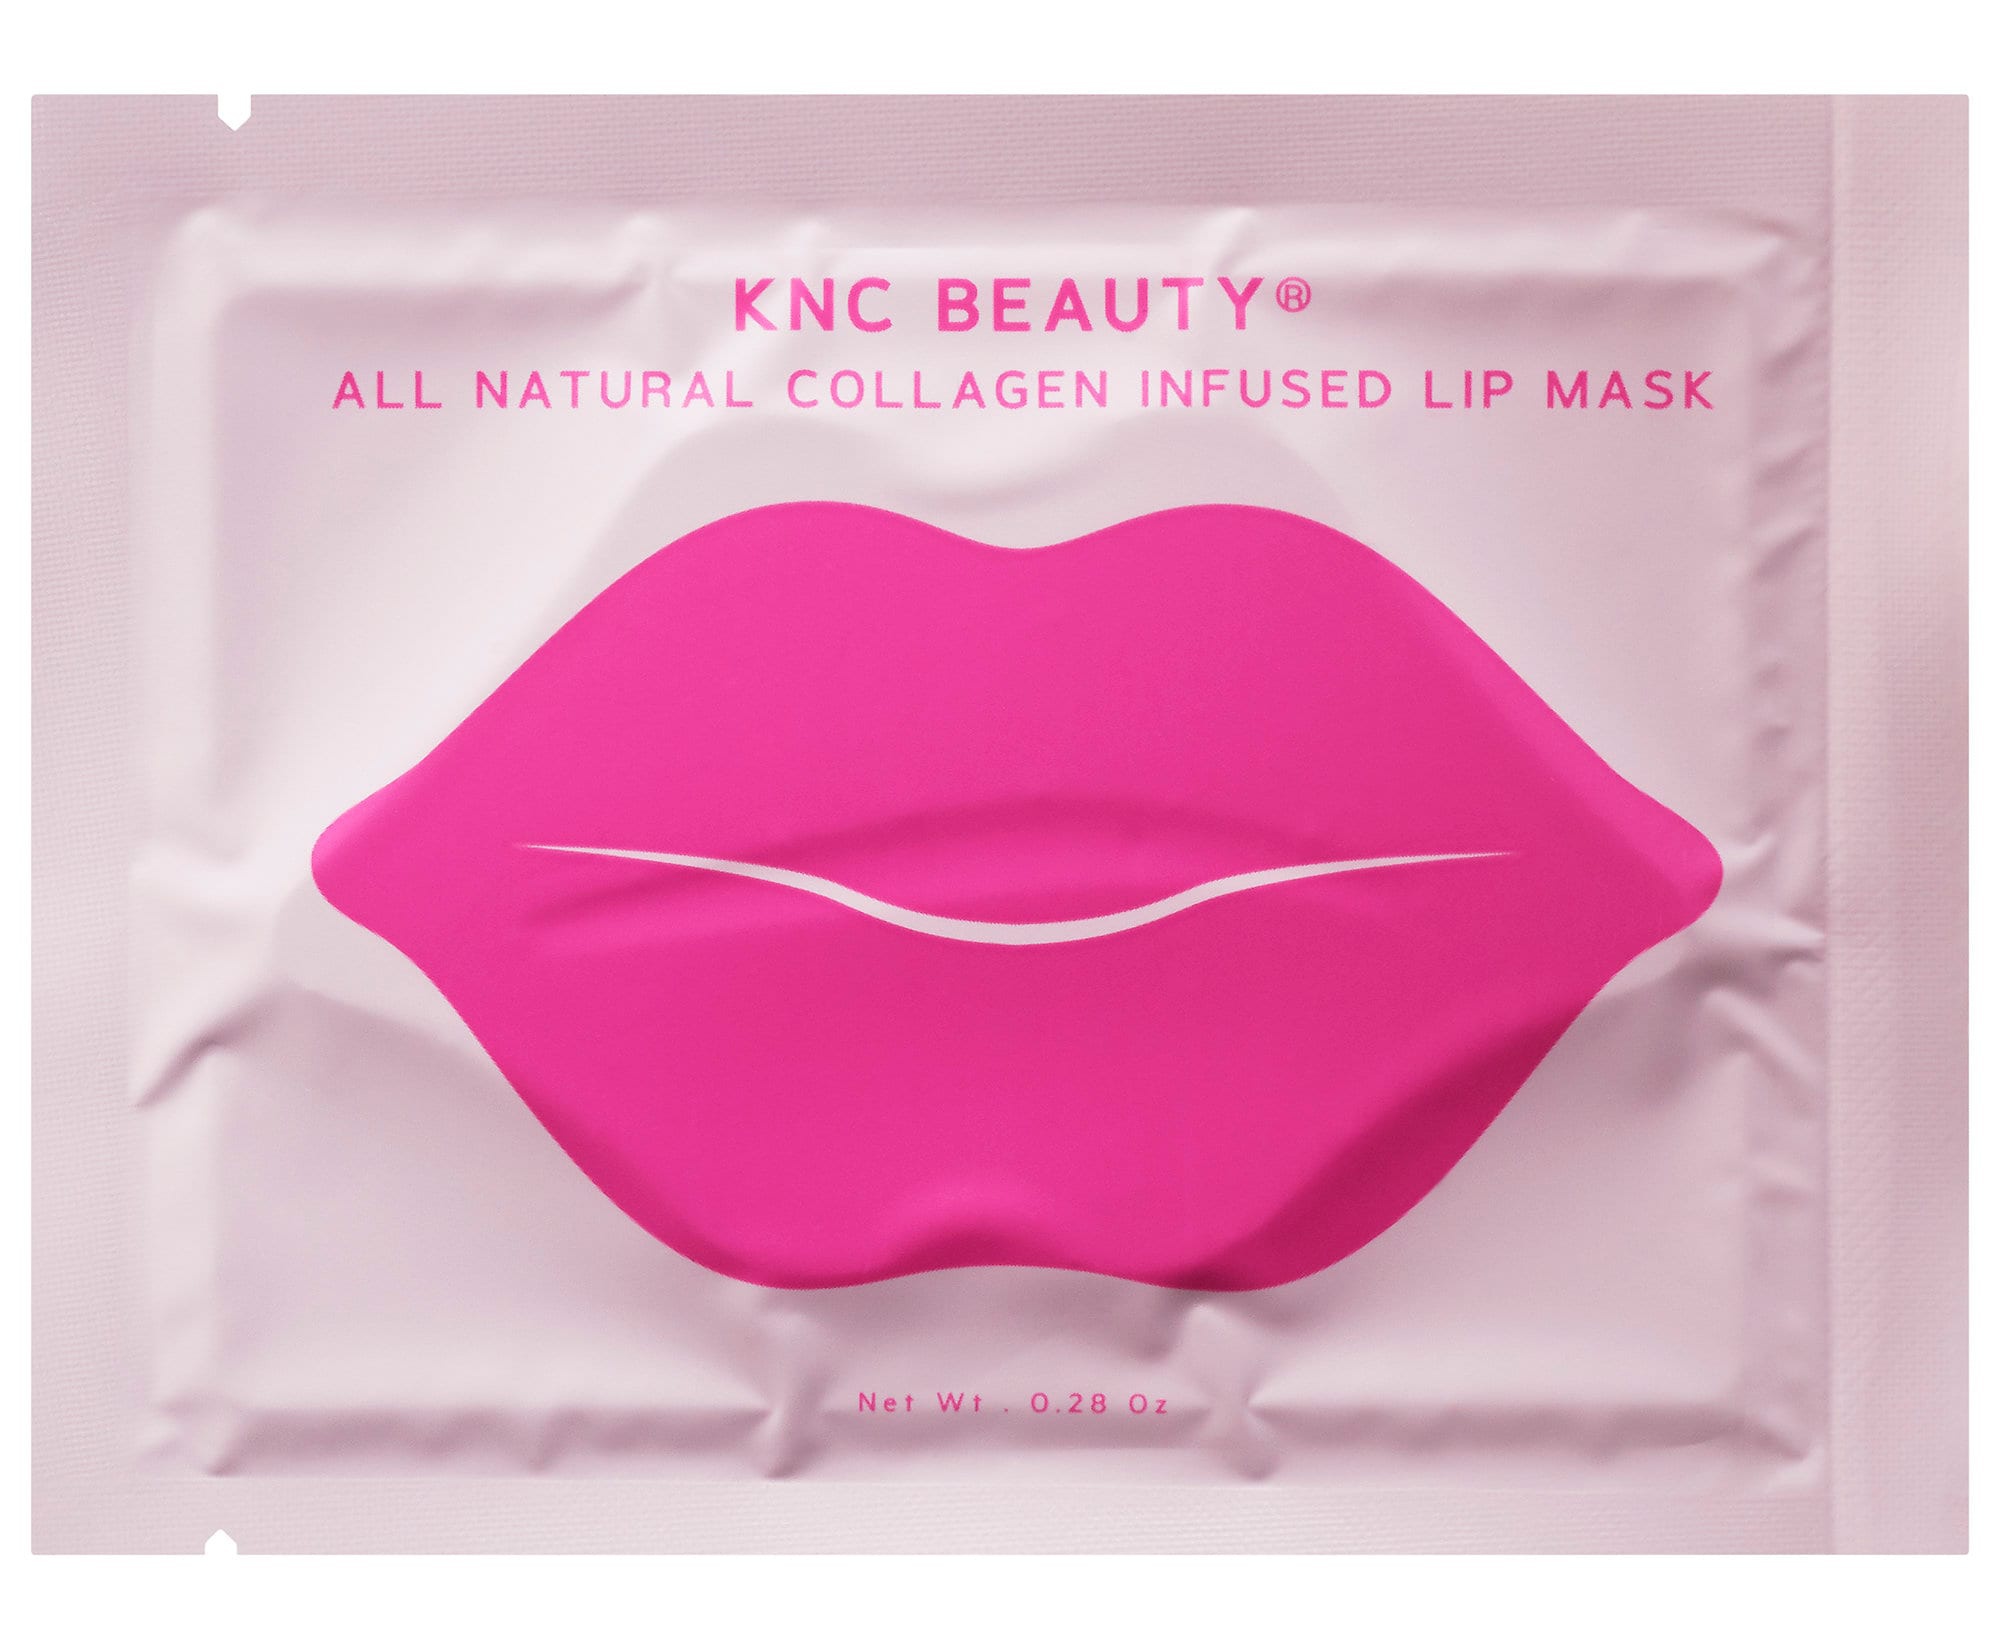 KNC Beauty Collagen-Infused Lip Mask